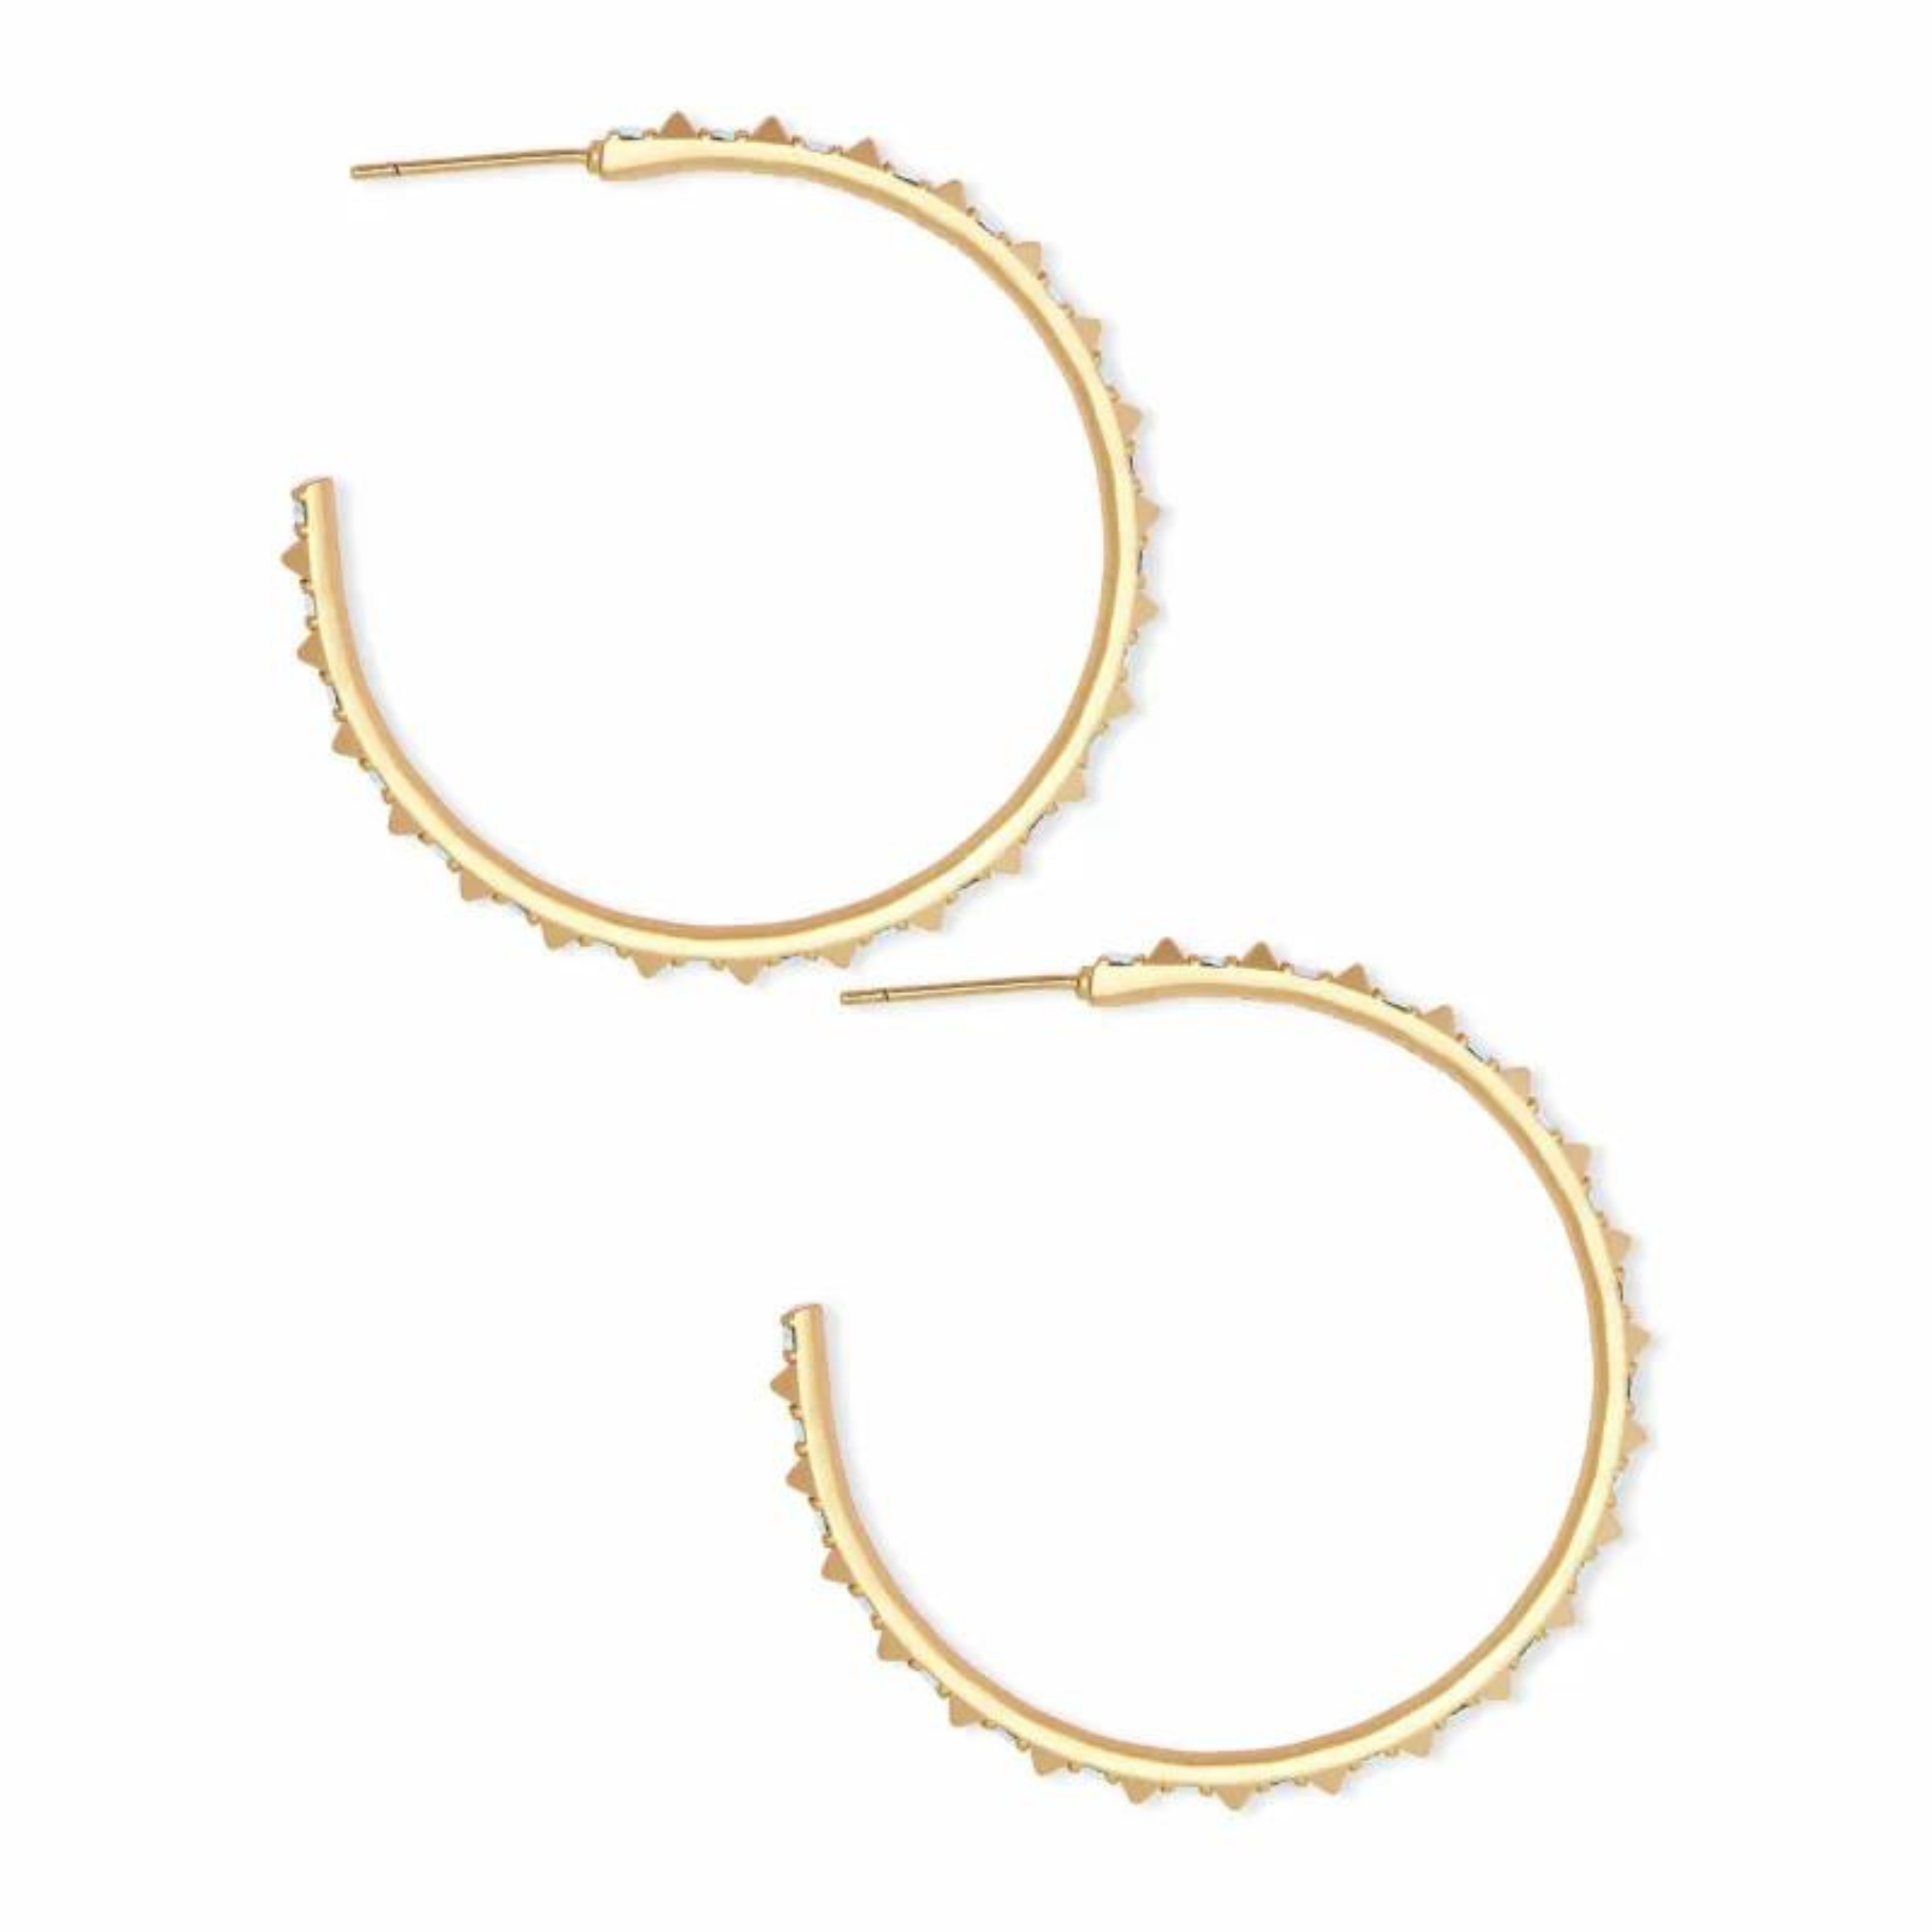 Kendra Scott | Veronica Hoop Earrings in Gold - Giddy Up Glamour Boutique